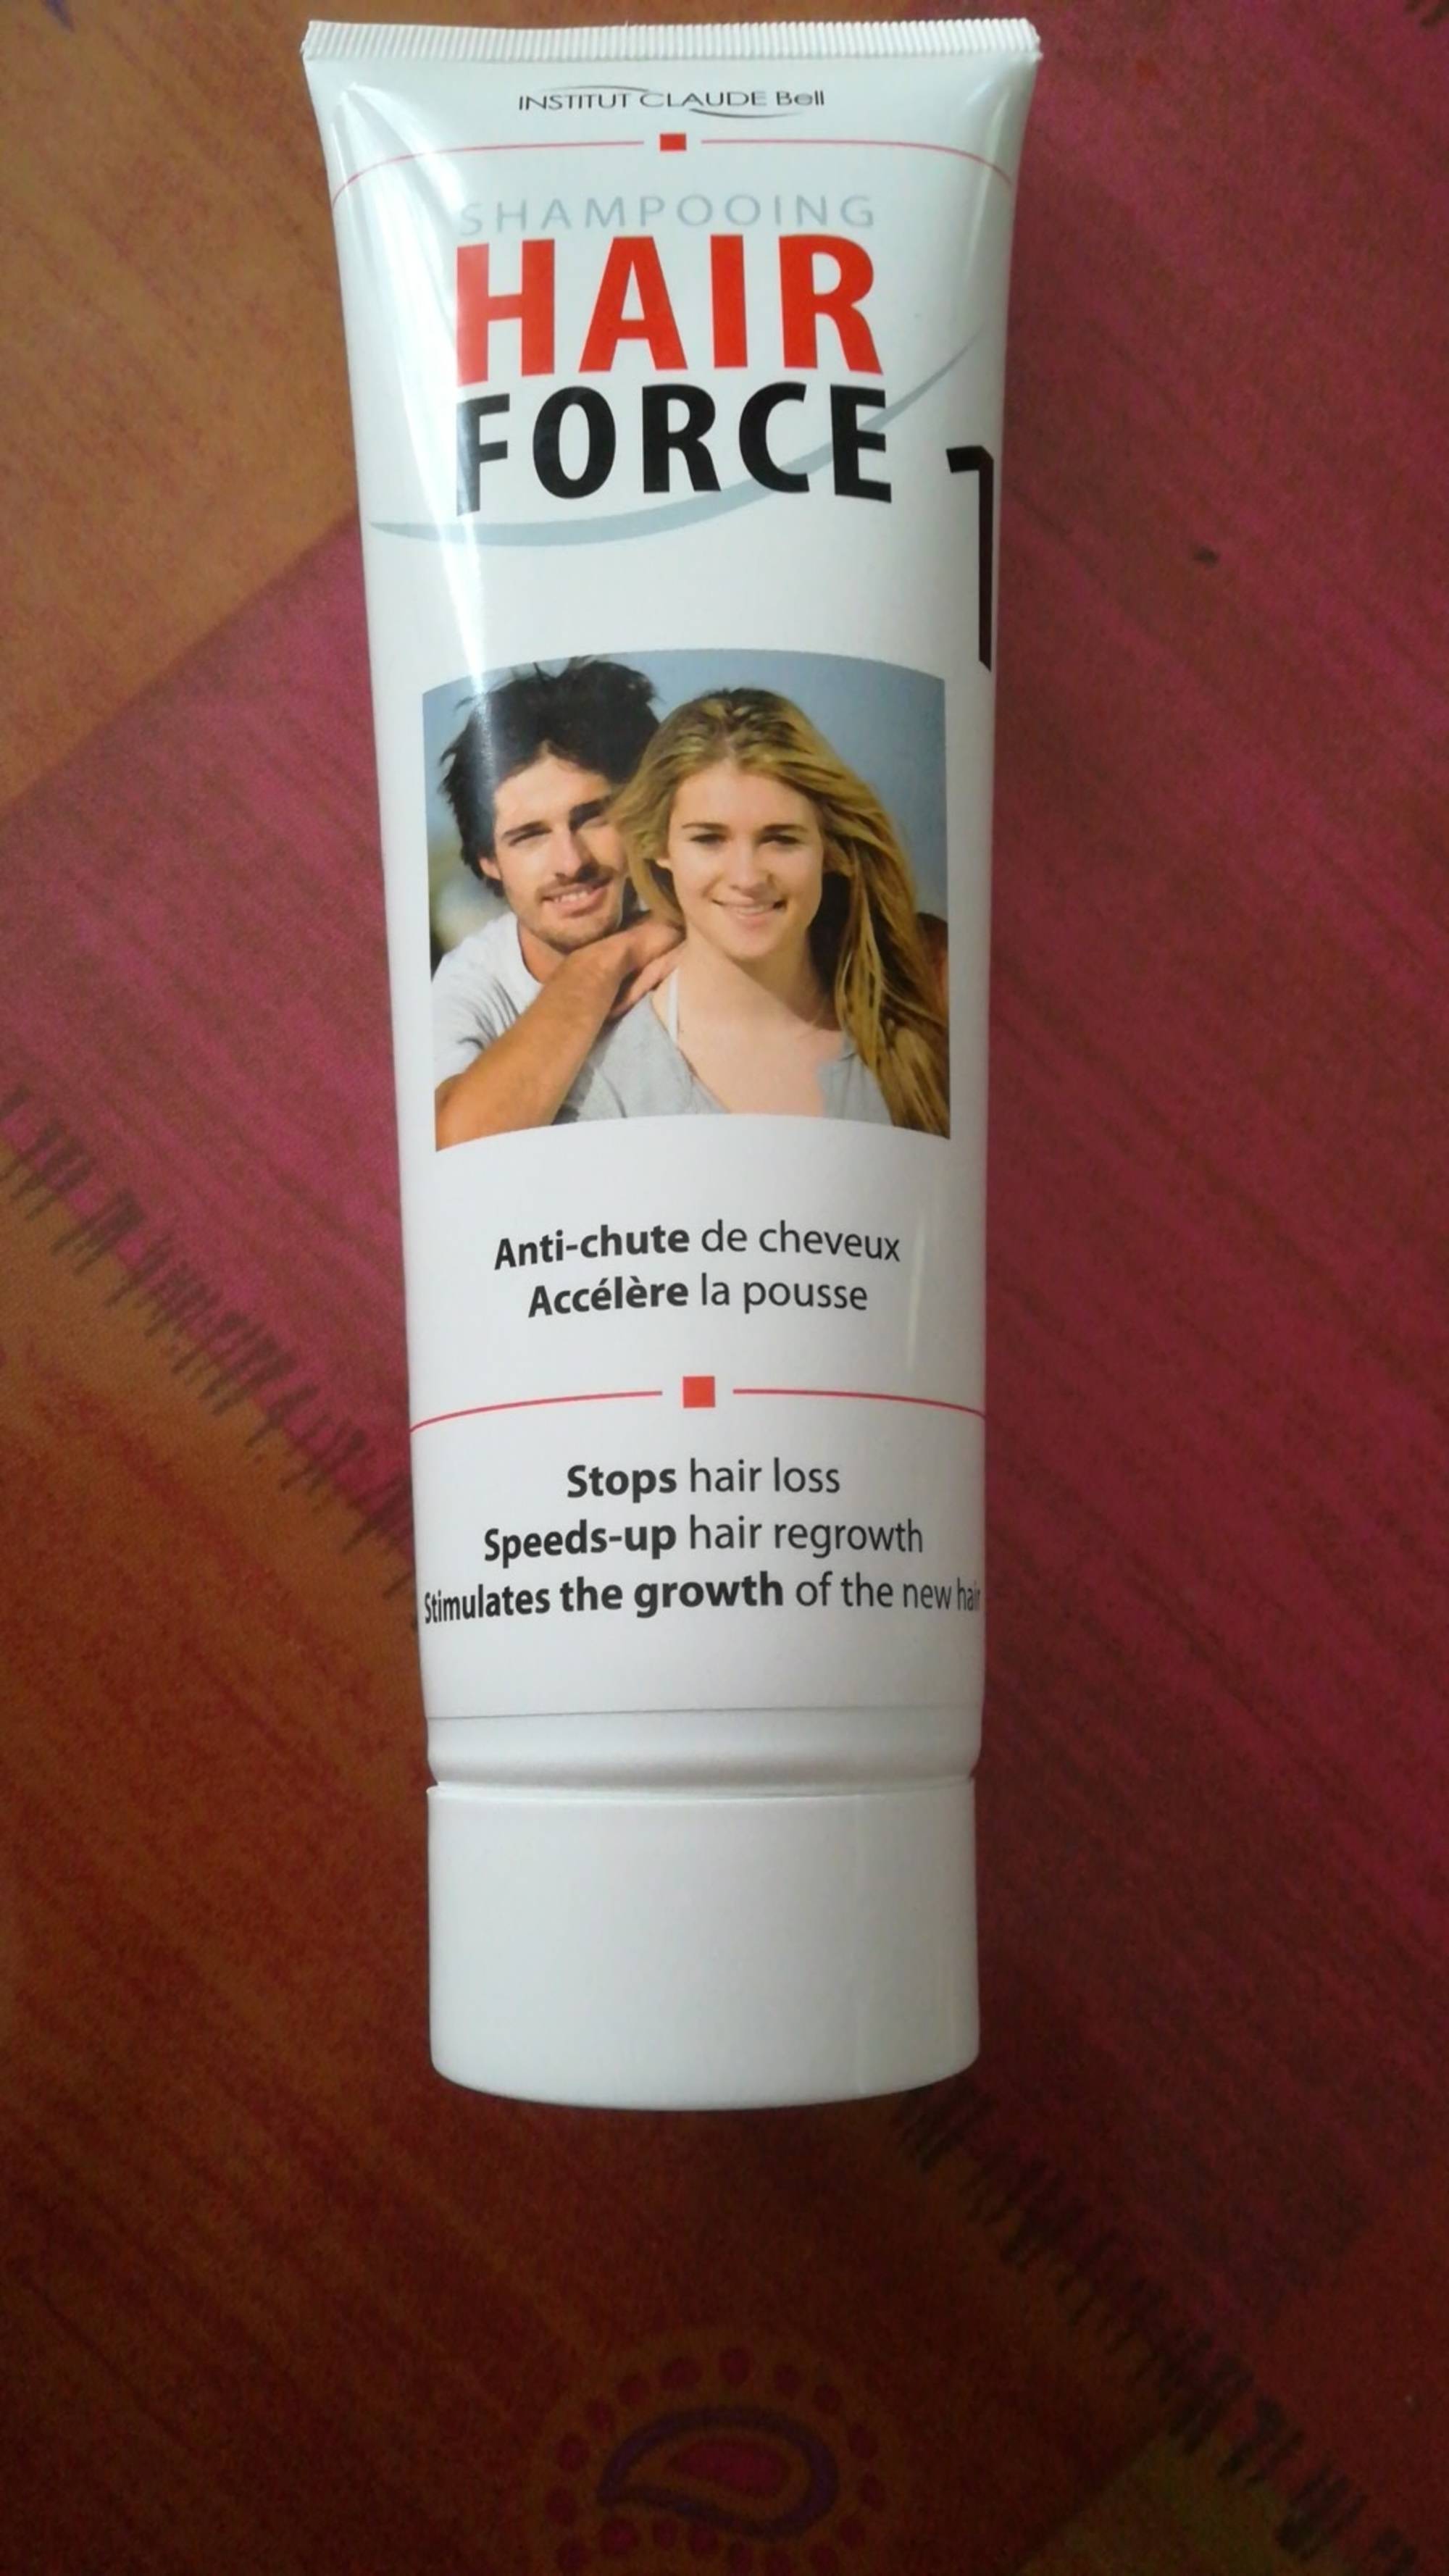 INSTITUT CLAUDE BELL - Hair force - Shampooing